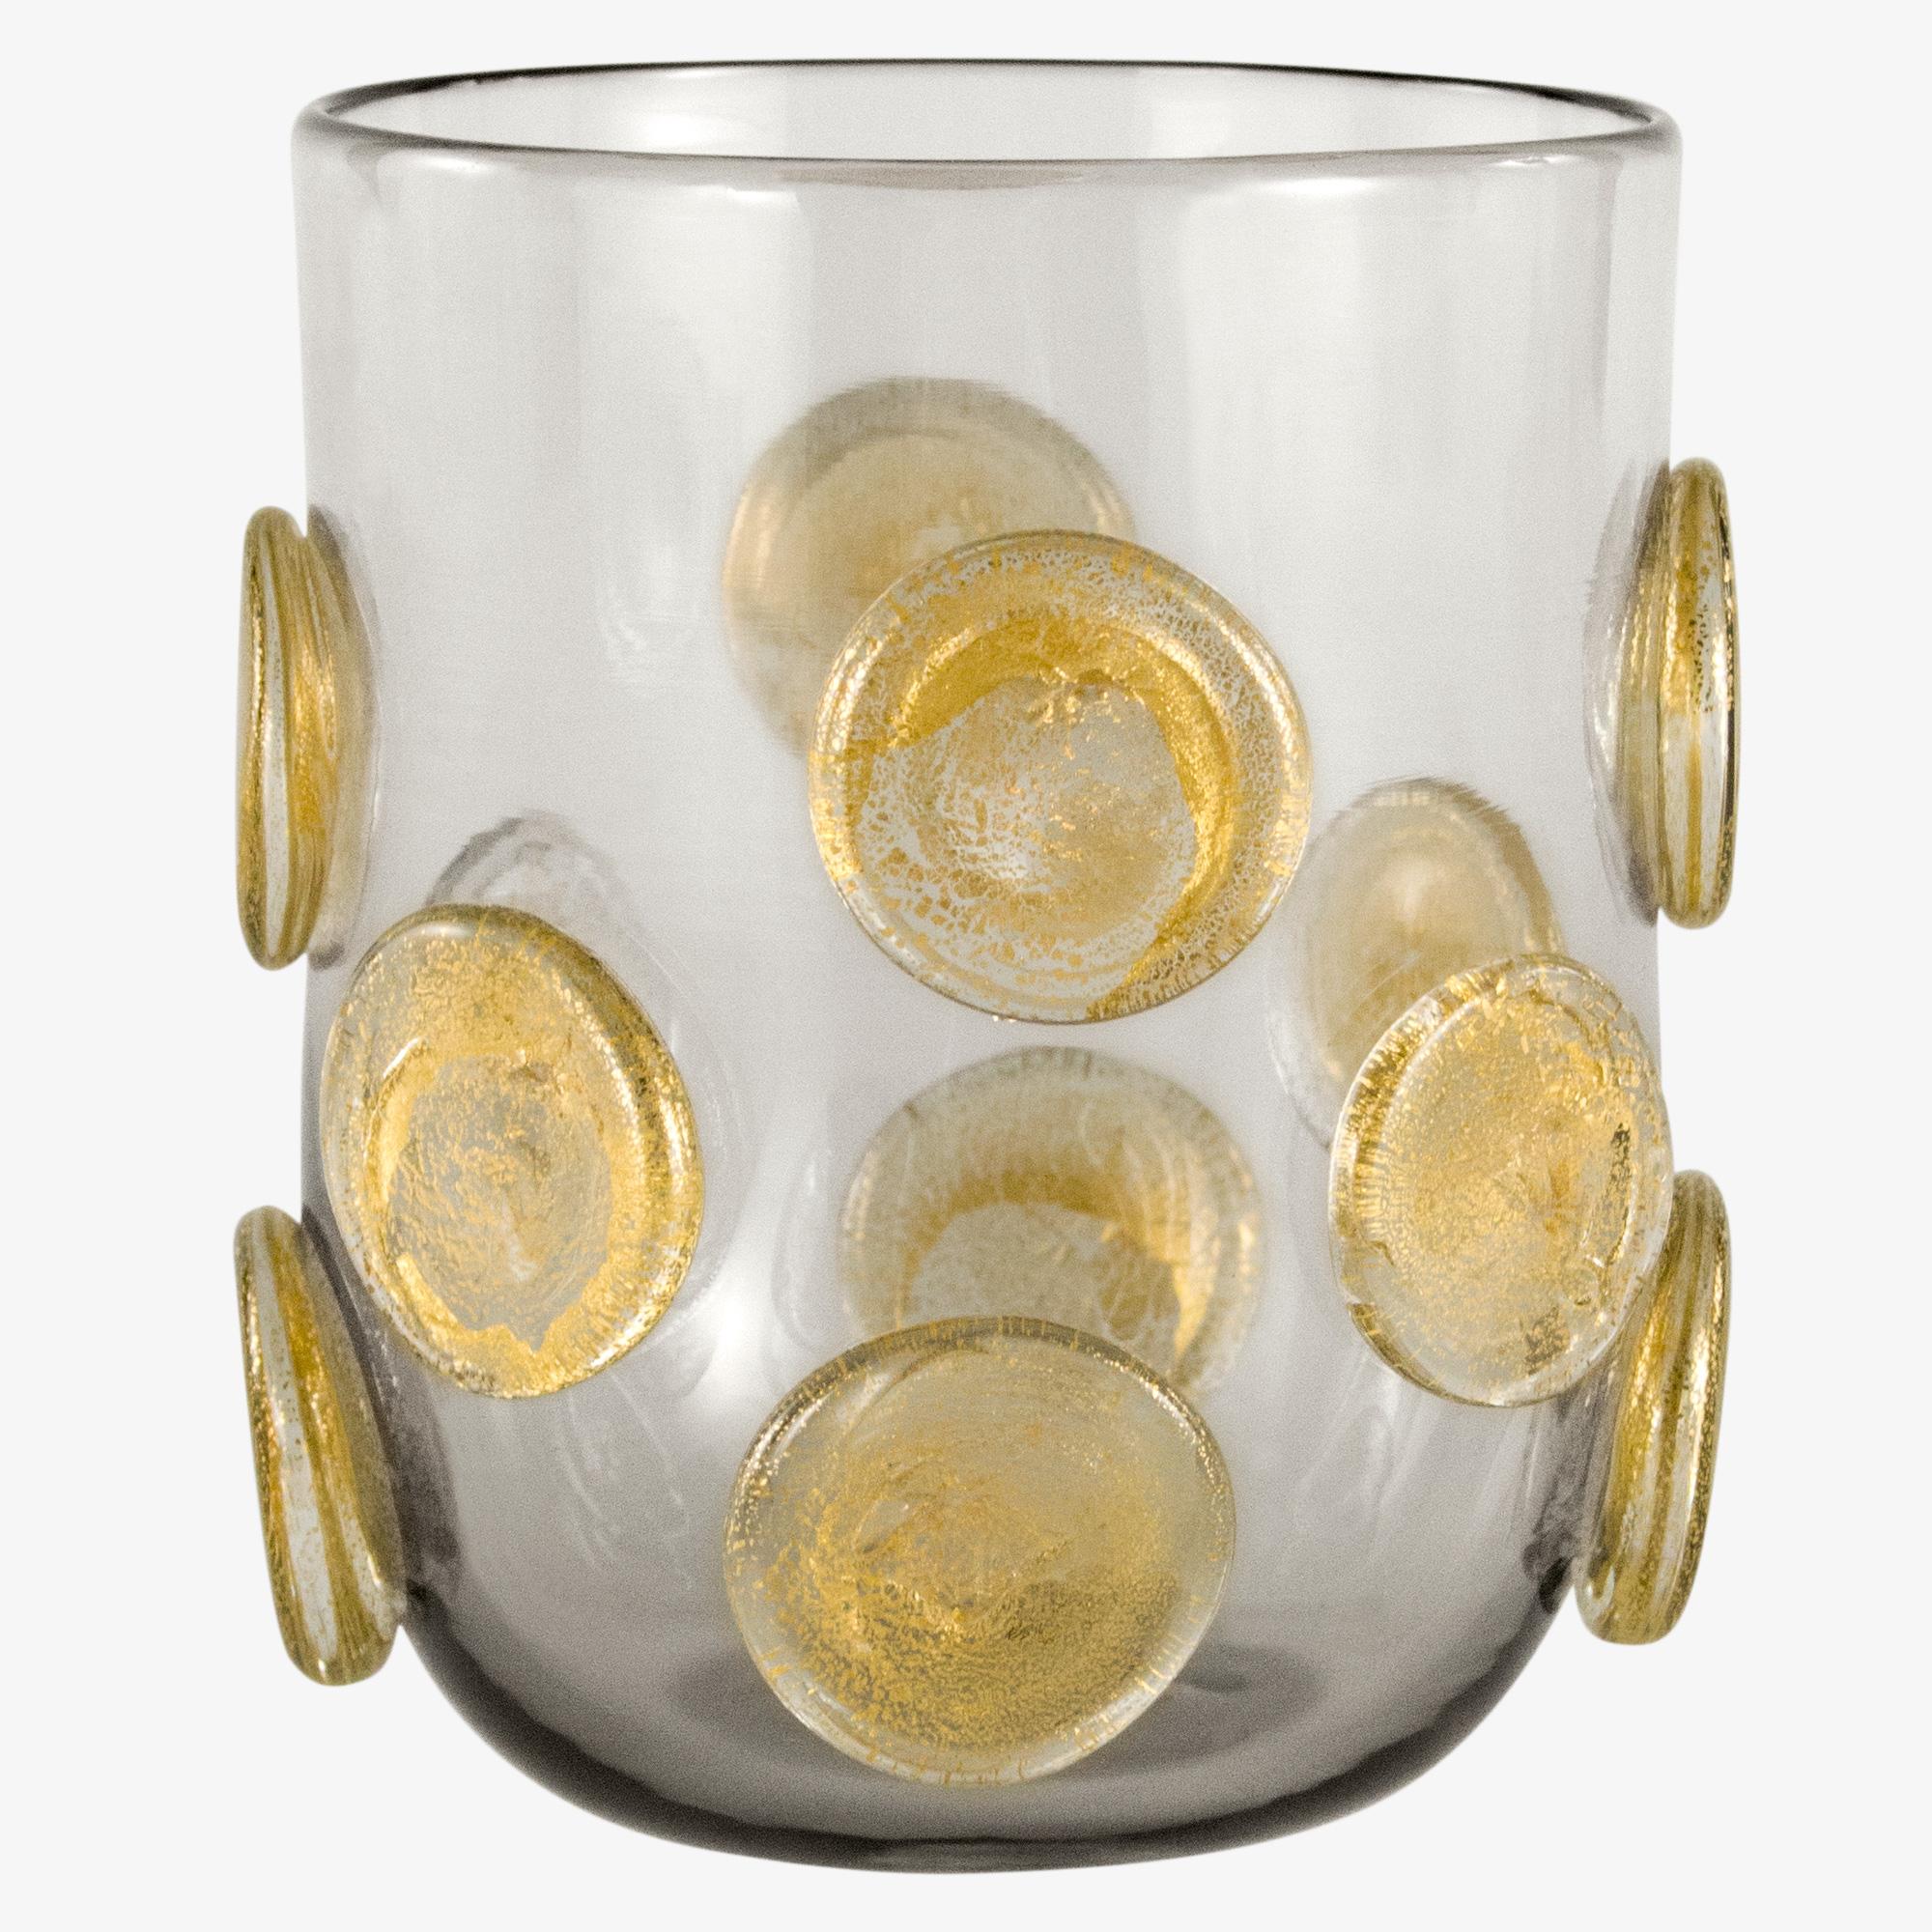 These artistic glasses are handmade by the master artisan in grey color with golden leaf round applications.
Every piece differs one from the other.

Precious pieces that can enrich every table.

The handcrafted soul of our lighting products is